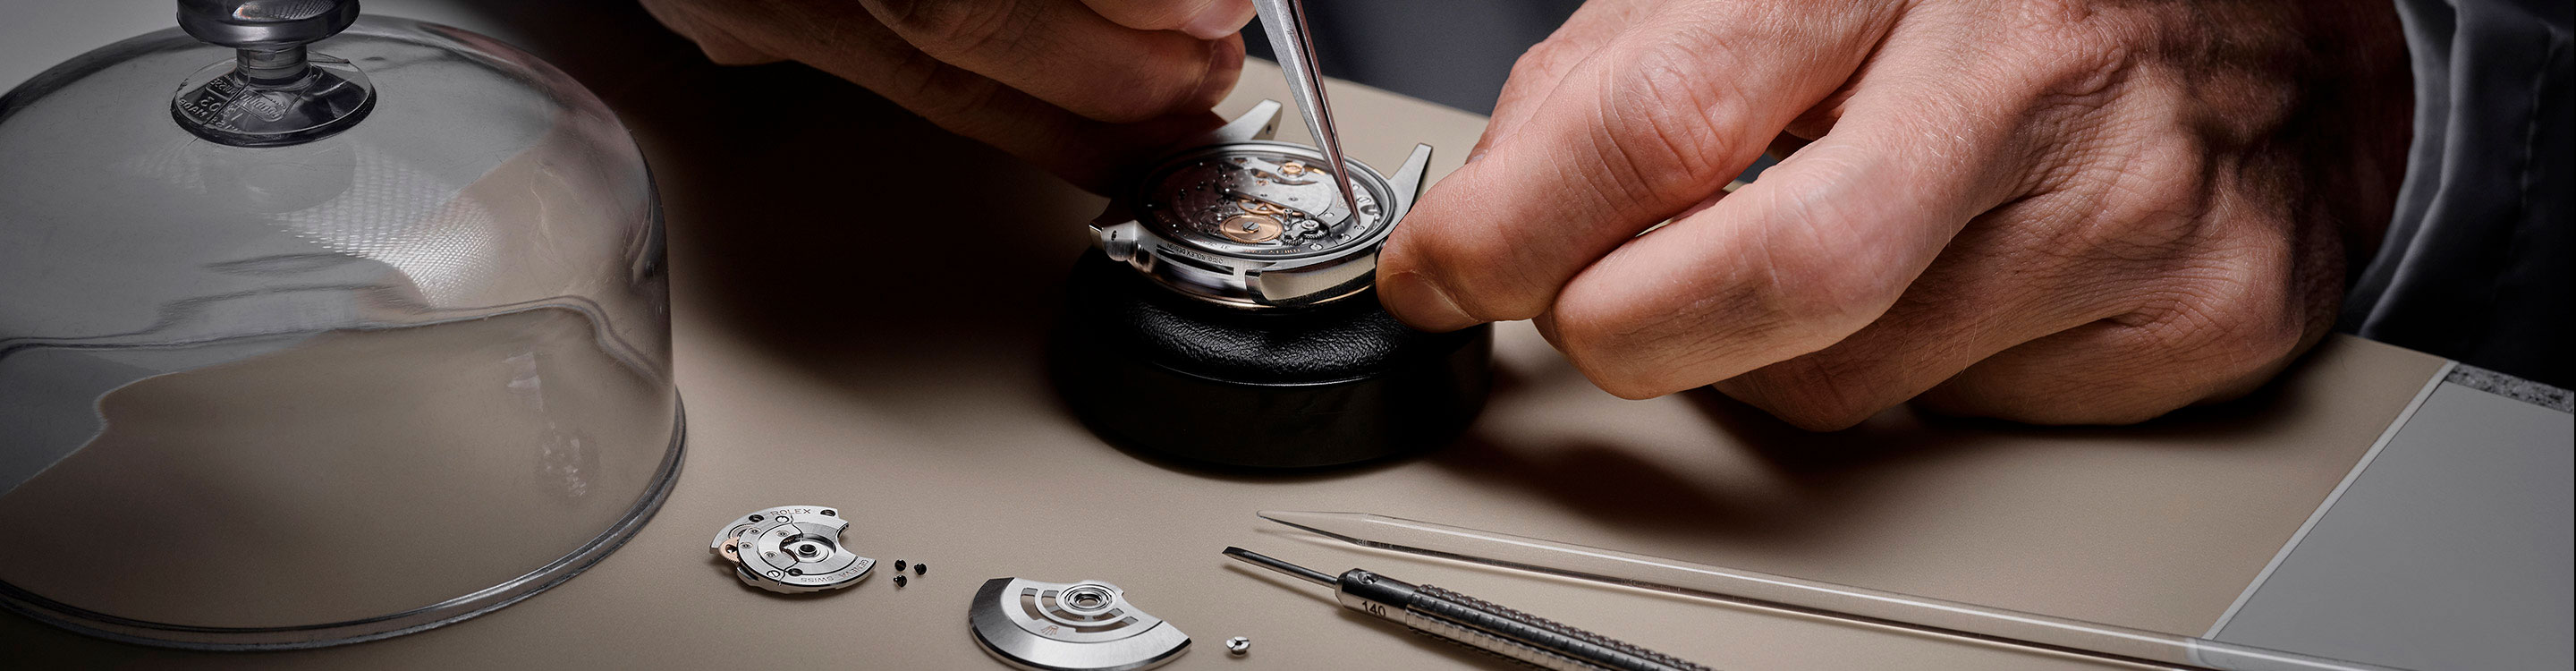 Contact Rolex watches servicing centre at Joyería Grassy